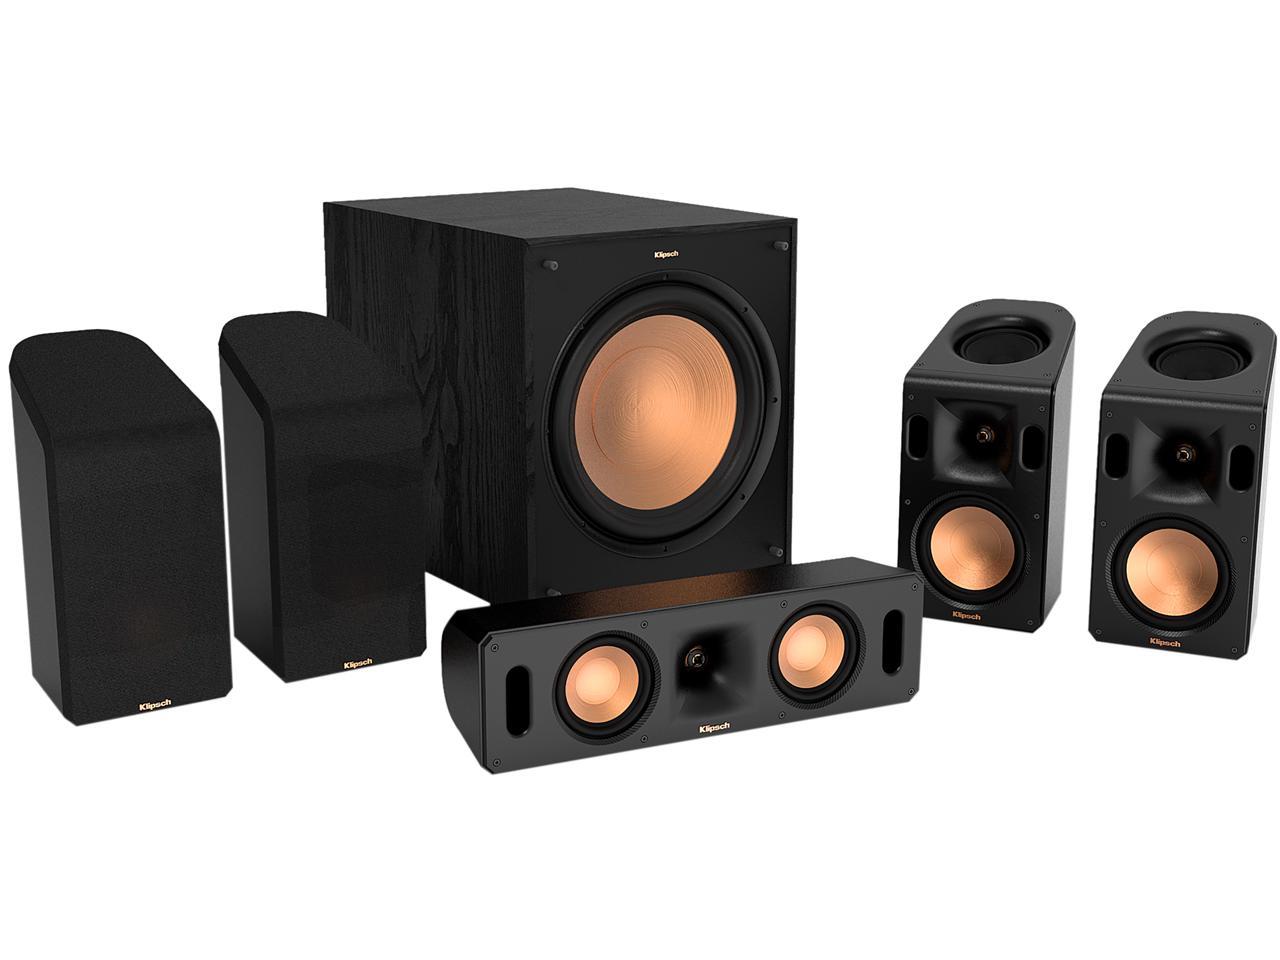 Klipsch Reference Cinema Dolby Atmos 5.1.4 Home Theater System $300 + Free Shipping